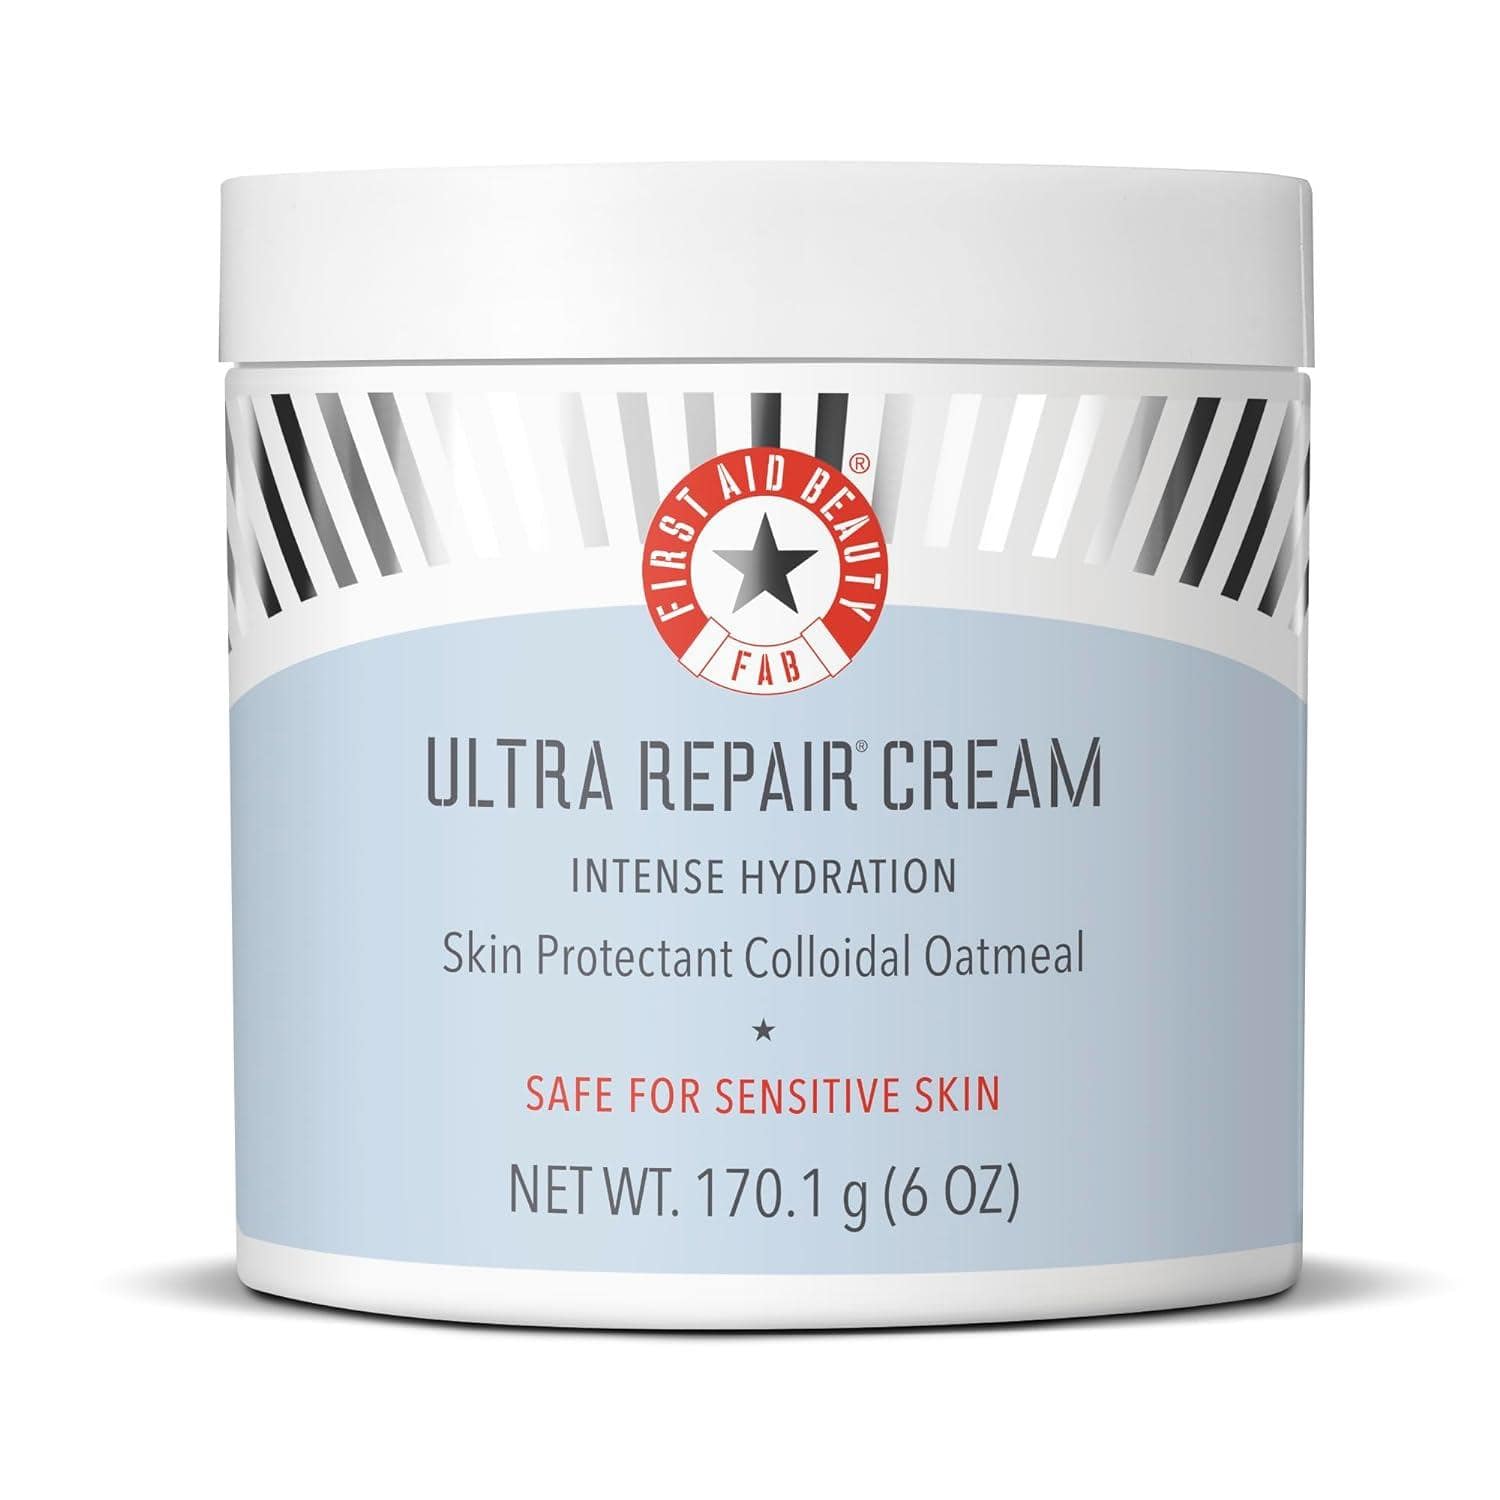 First Aid Beauty's Ultra Repair Cream, I'm impressed by Dr. Hirsch's nod to its Moisturizing Cream prowess, enriched with soothing colloidal oatmeal for unparalleled skincare.